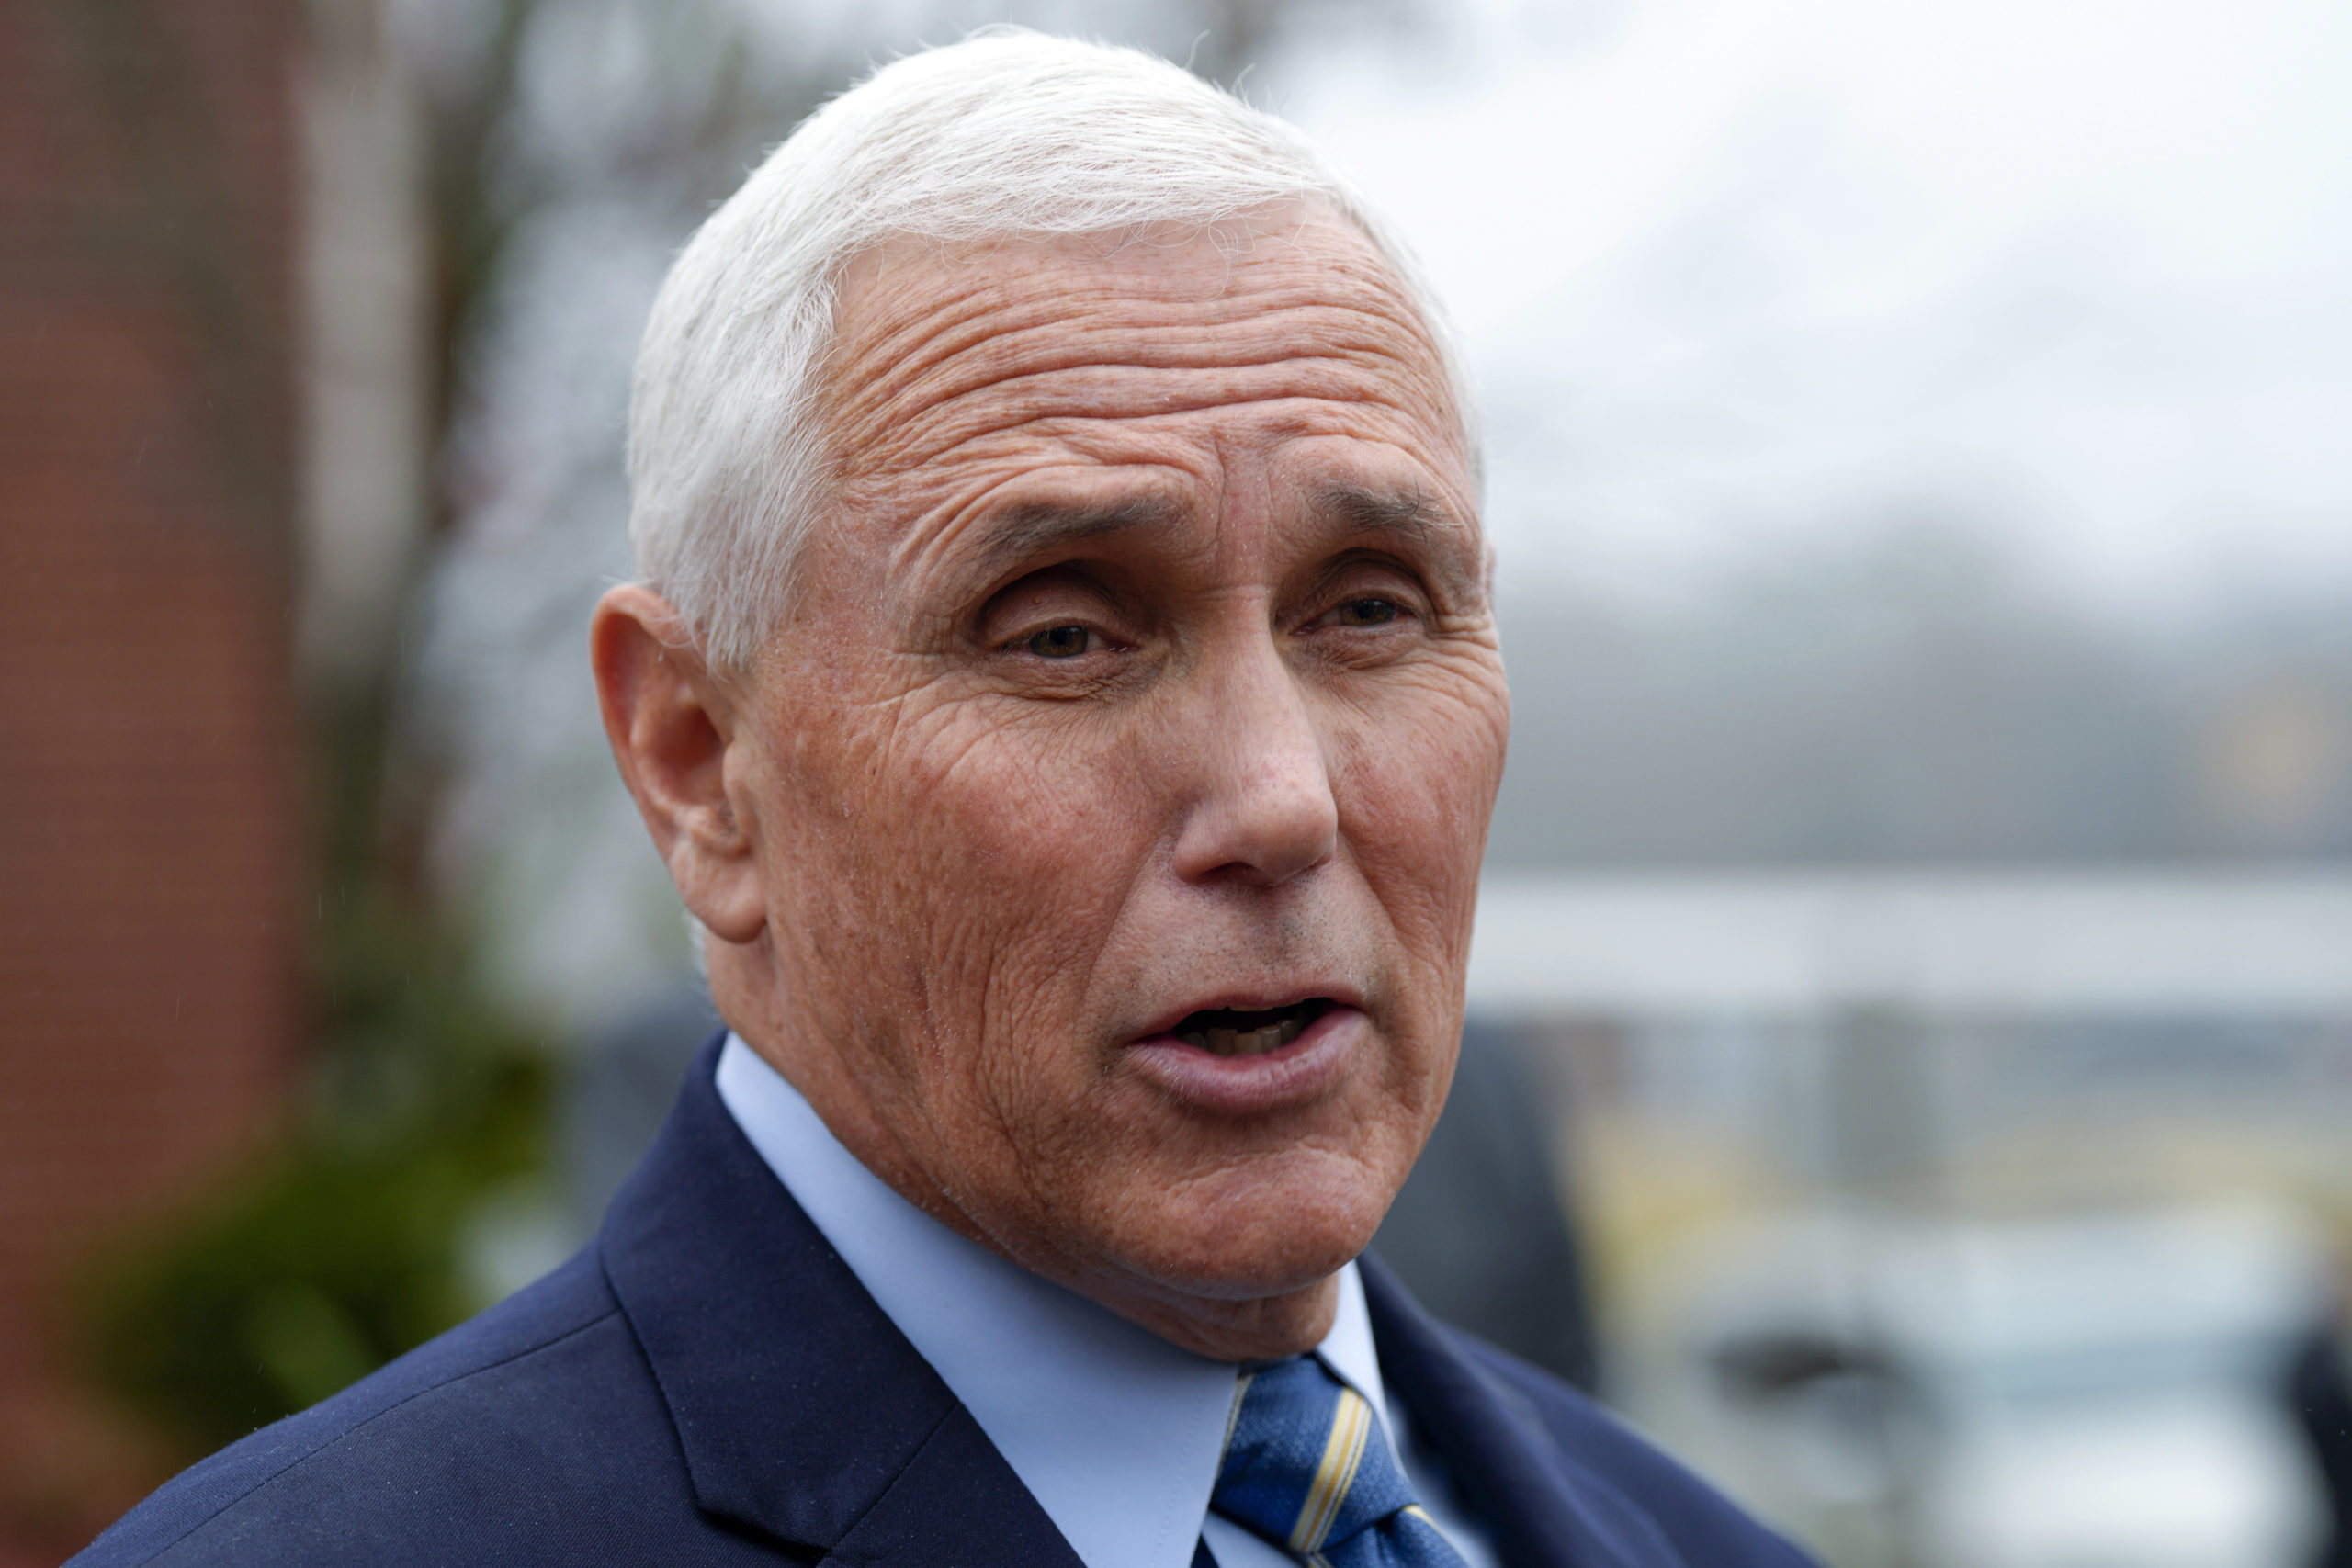 Former Vice President Mike Pence speaks with reporters on Dec. 6 at Garden Sanctuary Church of God in Rock Hill, S.C. Documents with classified markings were discovered in Pence's home in Indiana last week, according to his attorney.